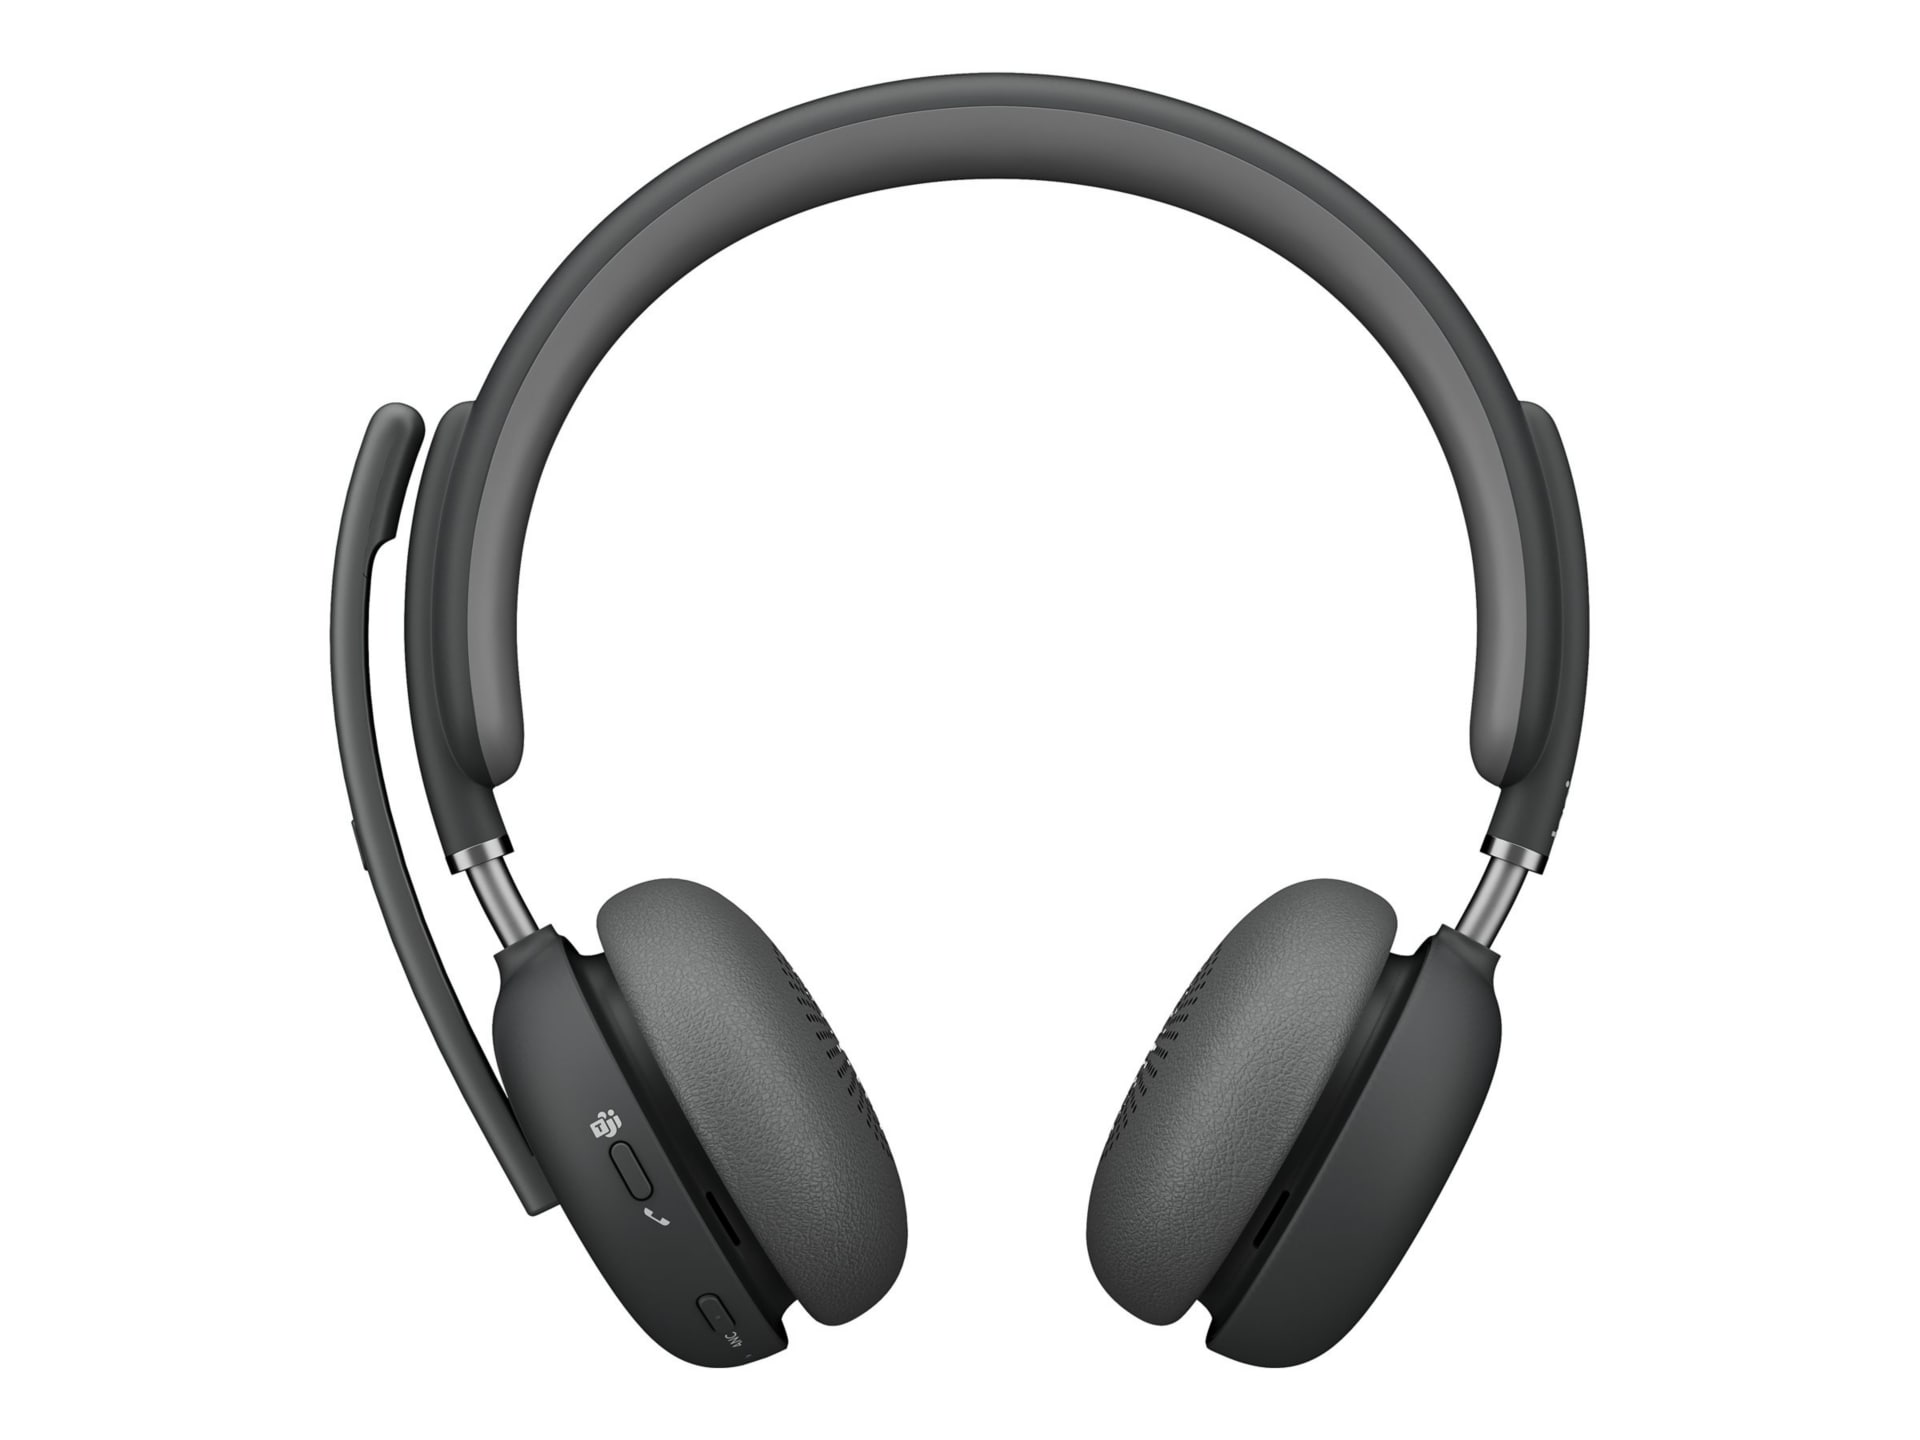 Logitech Zone Wireless 2 Premium Noise Canceling Headset with Hybrid ANC, Certified for Microsoft Teams and Fast Pair,